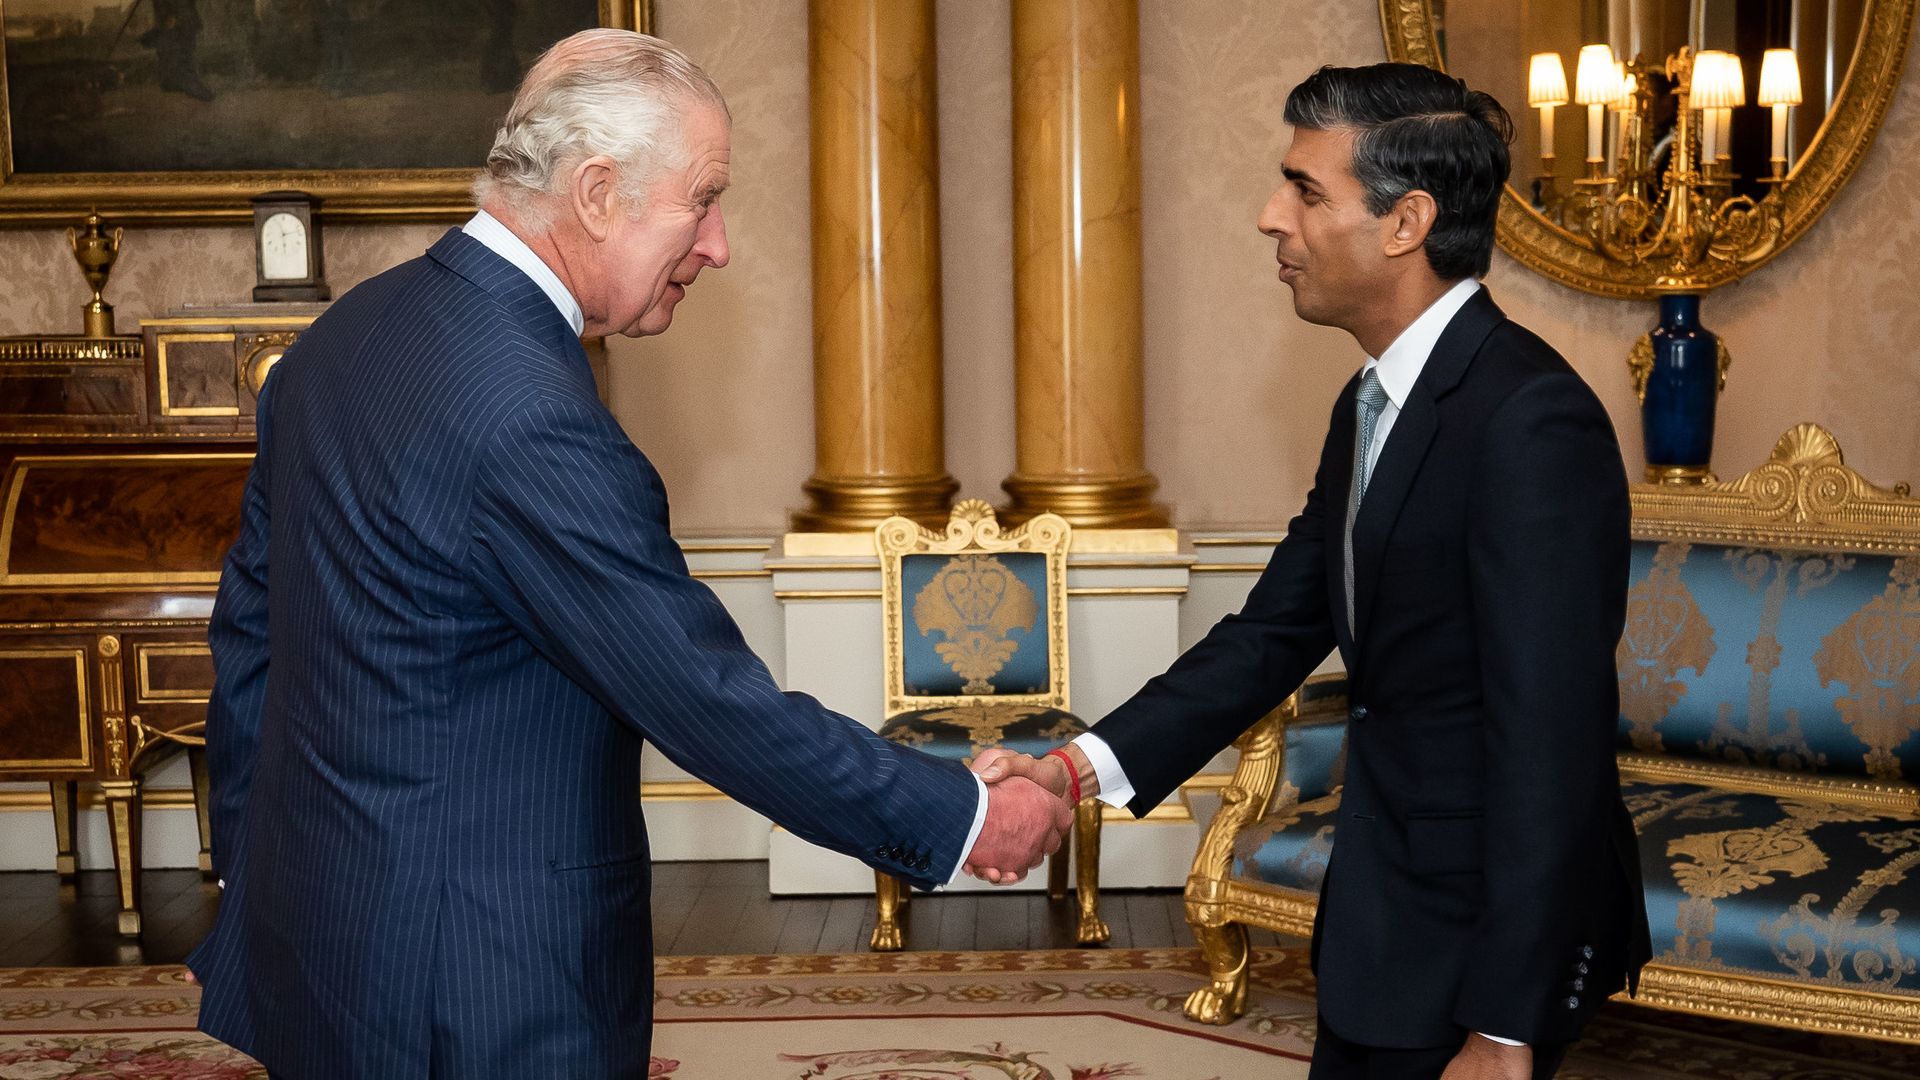  King Charles III welcomes Rishi Sunak during an audience at Buckingham Palace on Oct. 25. Photo: Aaron Chown/WPA via Getty Images